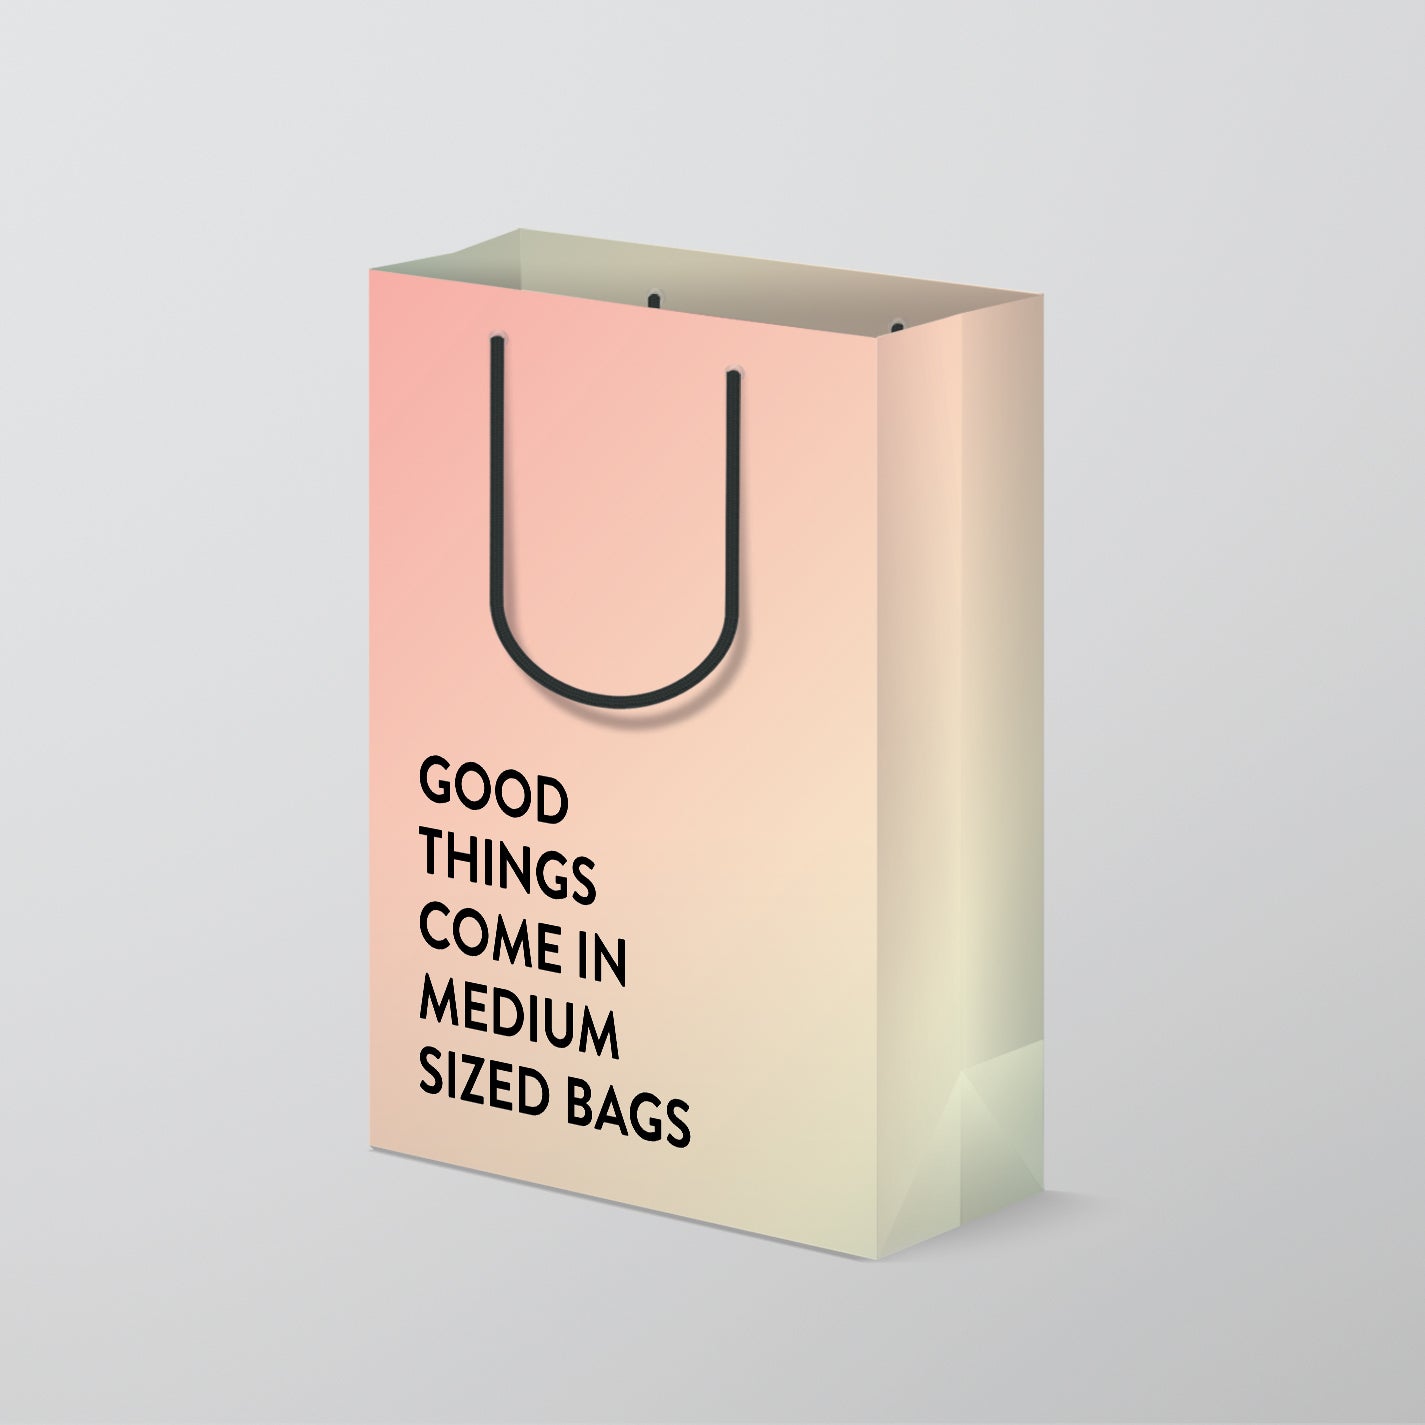 Good Gradient – Premium Gift Bag by Fine Moments